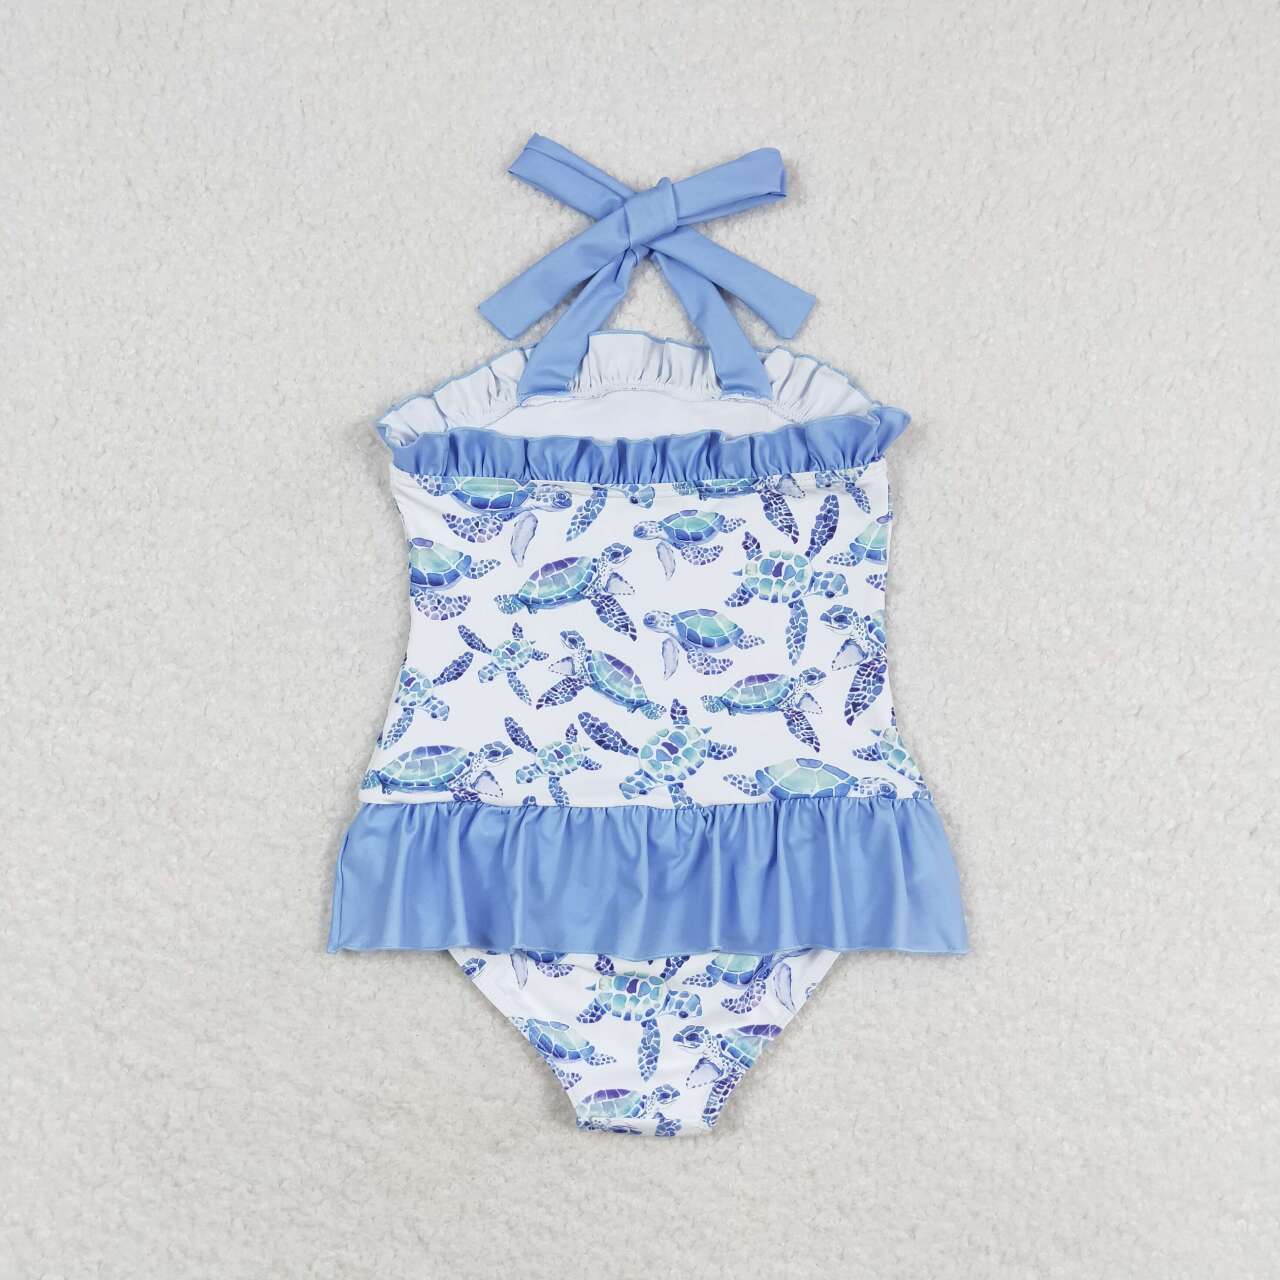 S0430 Turtle blue lace white one piece swimsuit